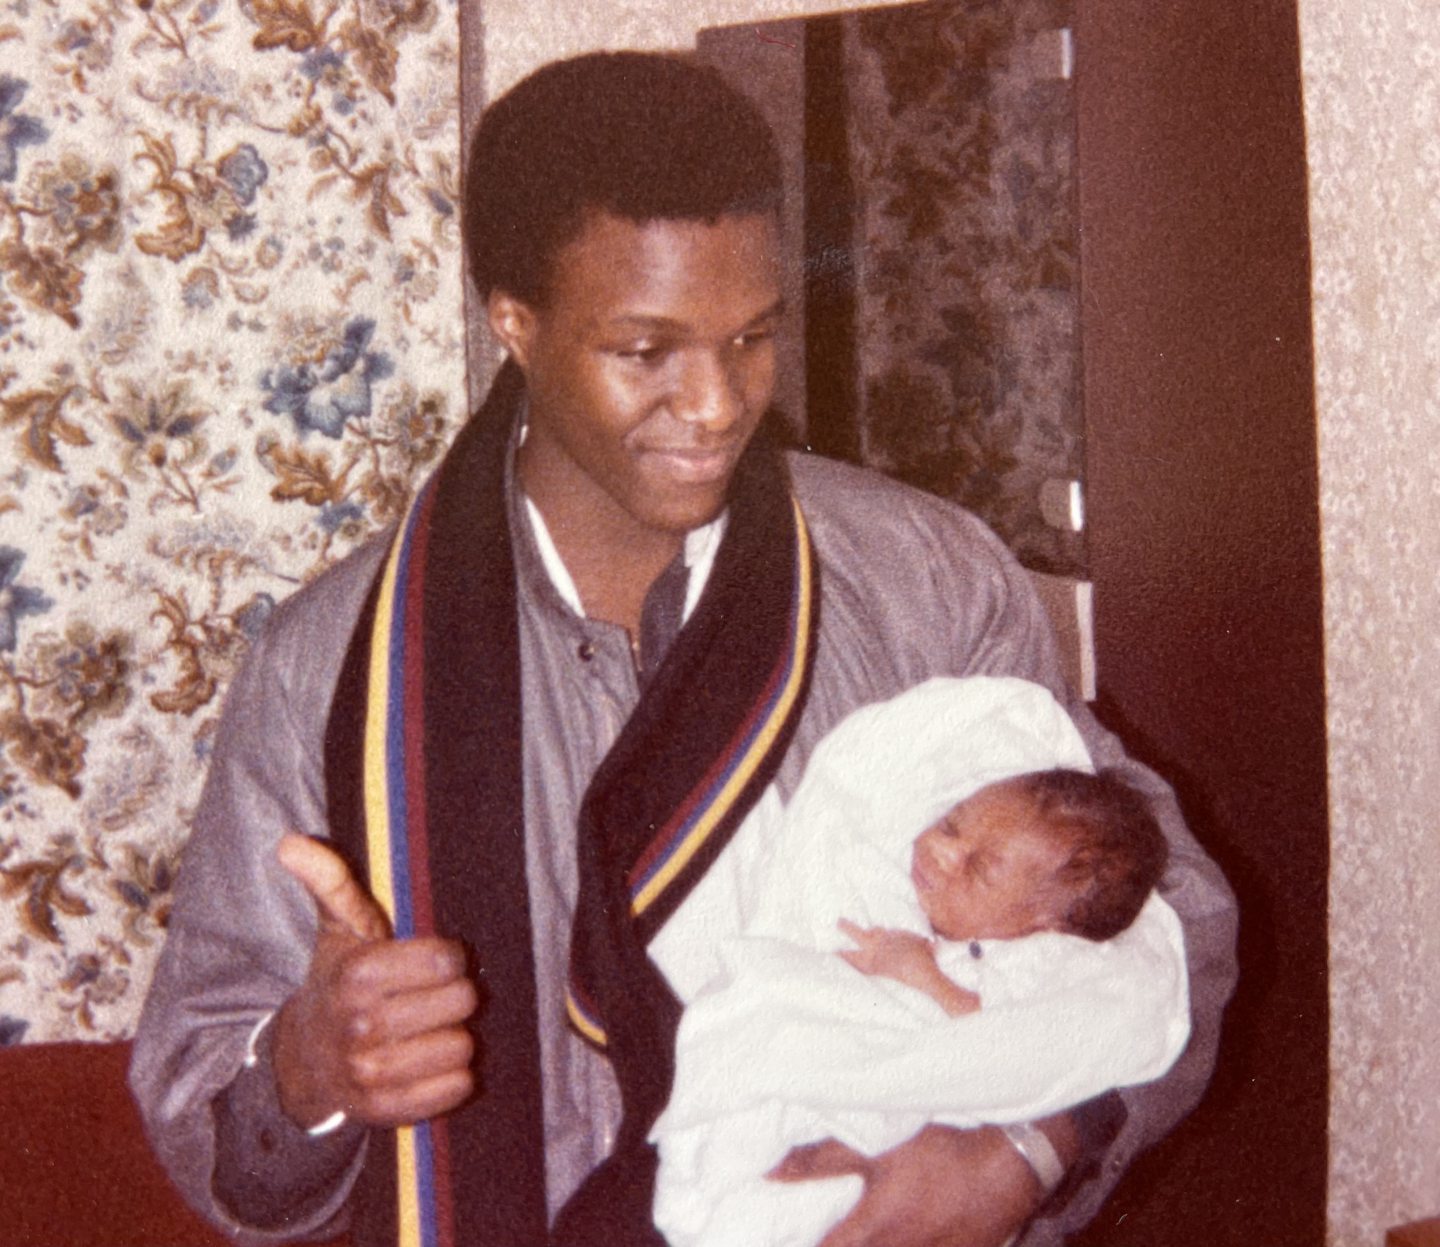 James N'Dow holding a baby in London in 1986